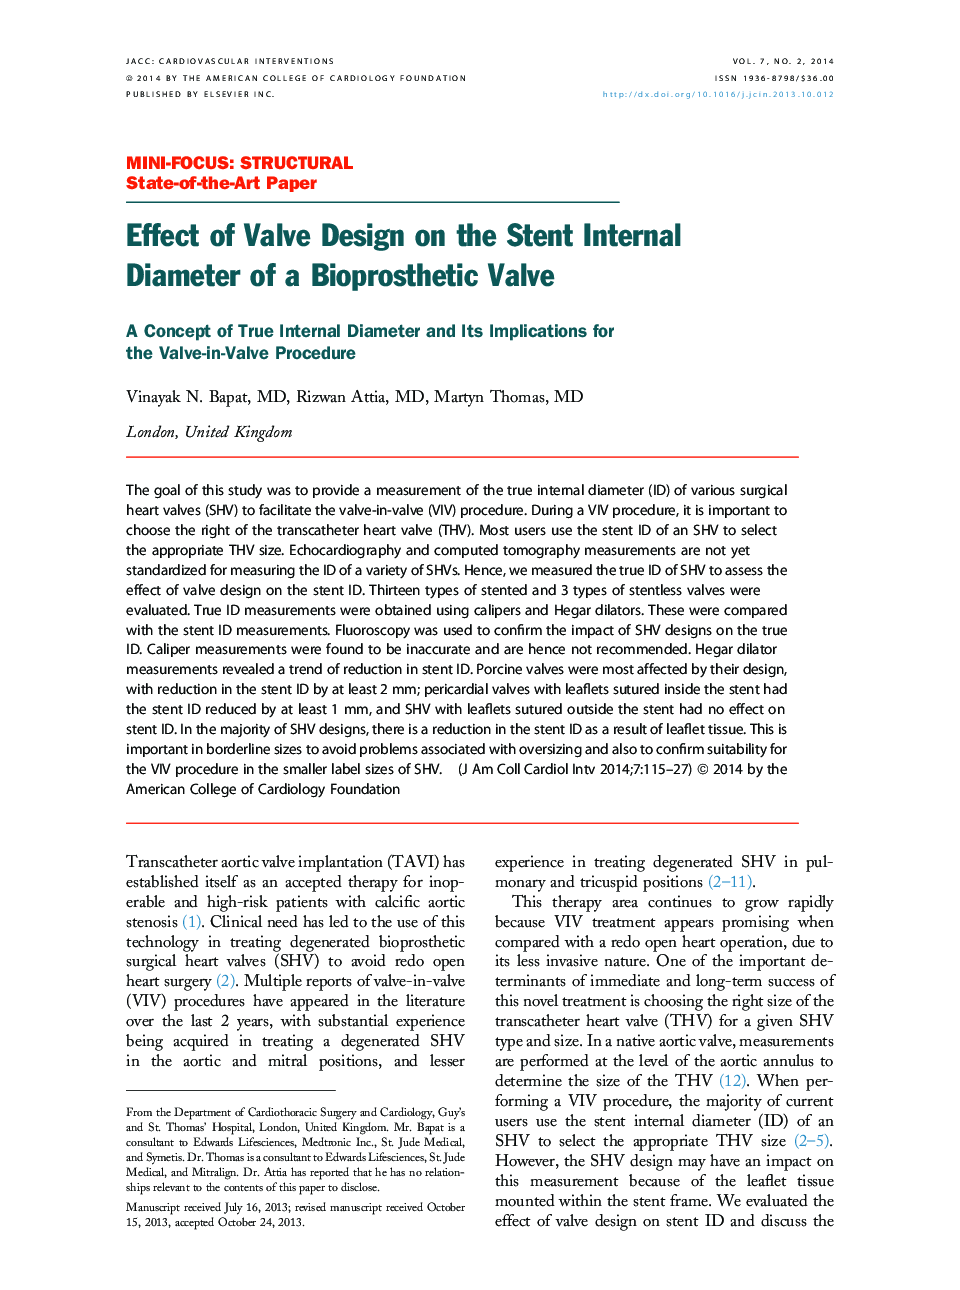 Effect of Valve Design on the Stent Internal Diameter of a Bioprosthetic Valve: A Concept of True Internal Diameter and Its Implications for the Valve-in-Valve Procedure